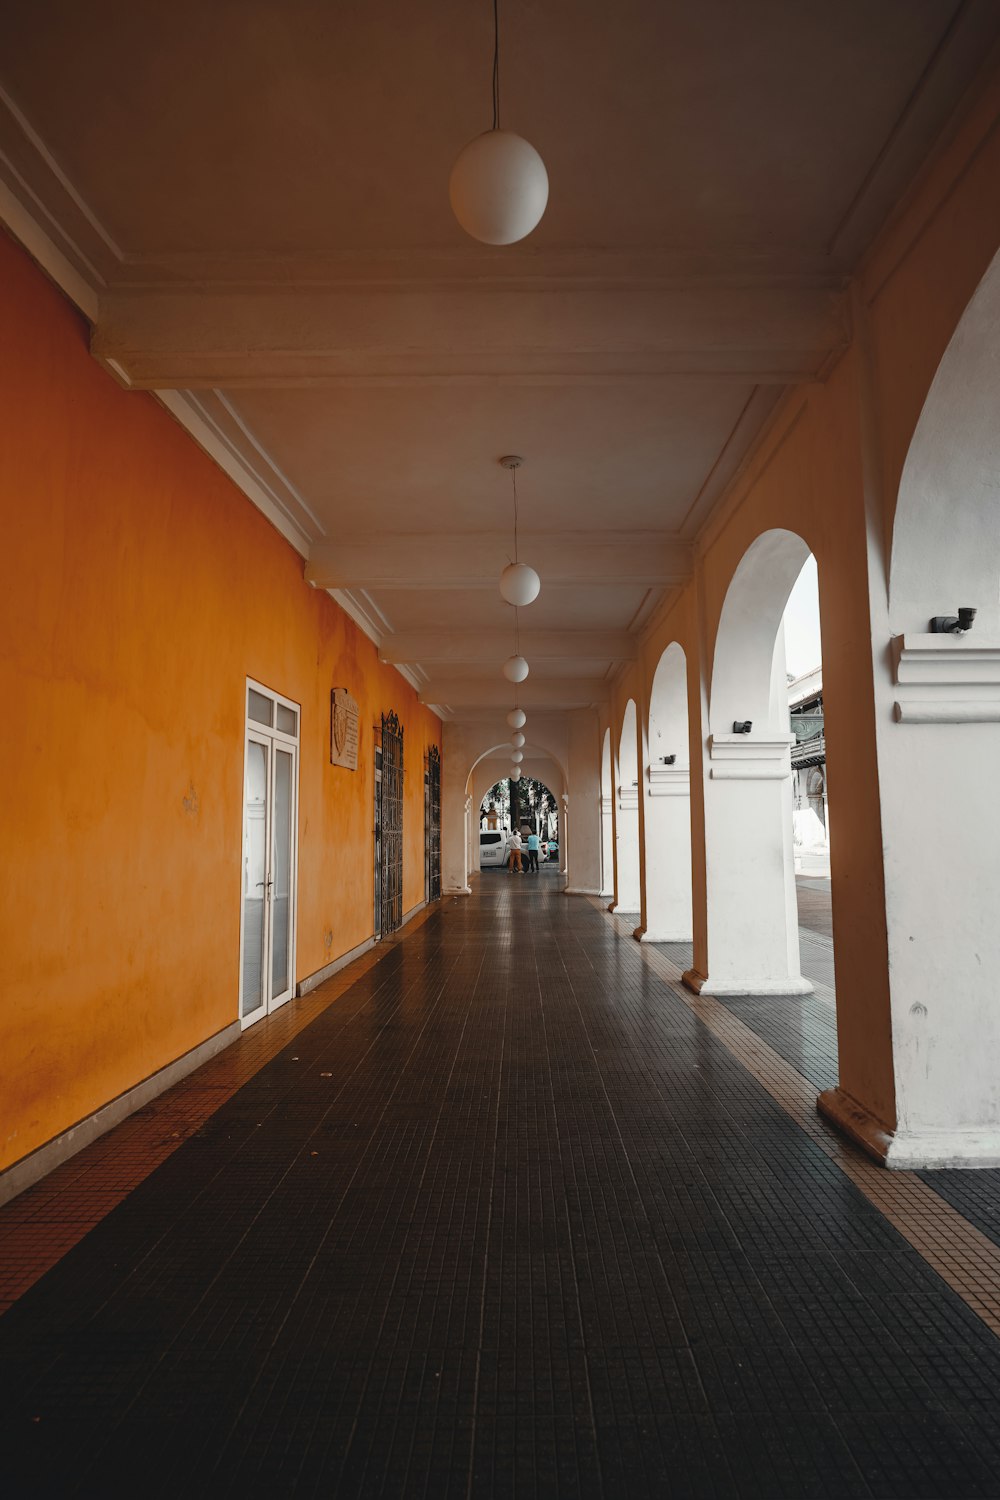 a long hallway with orange walls and white arches